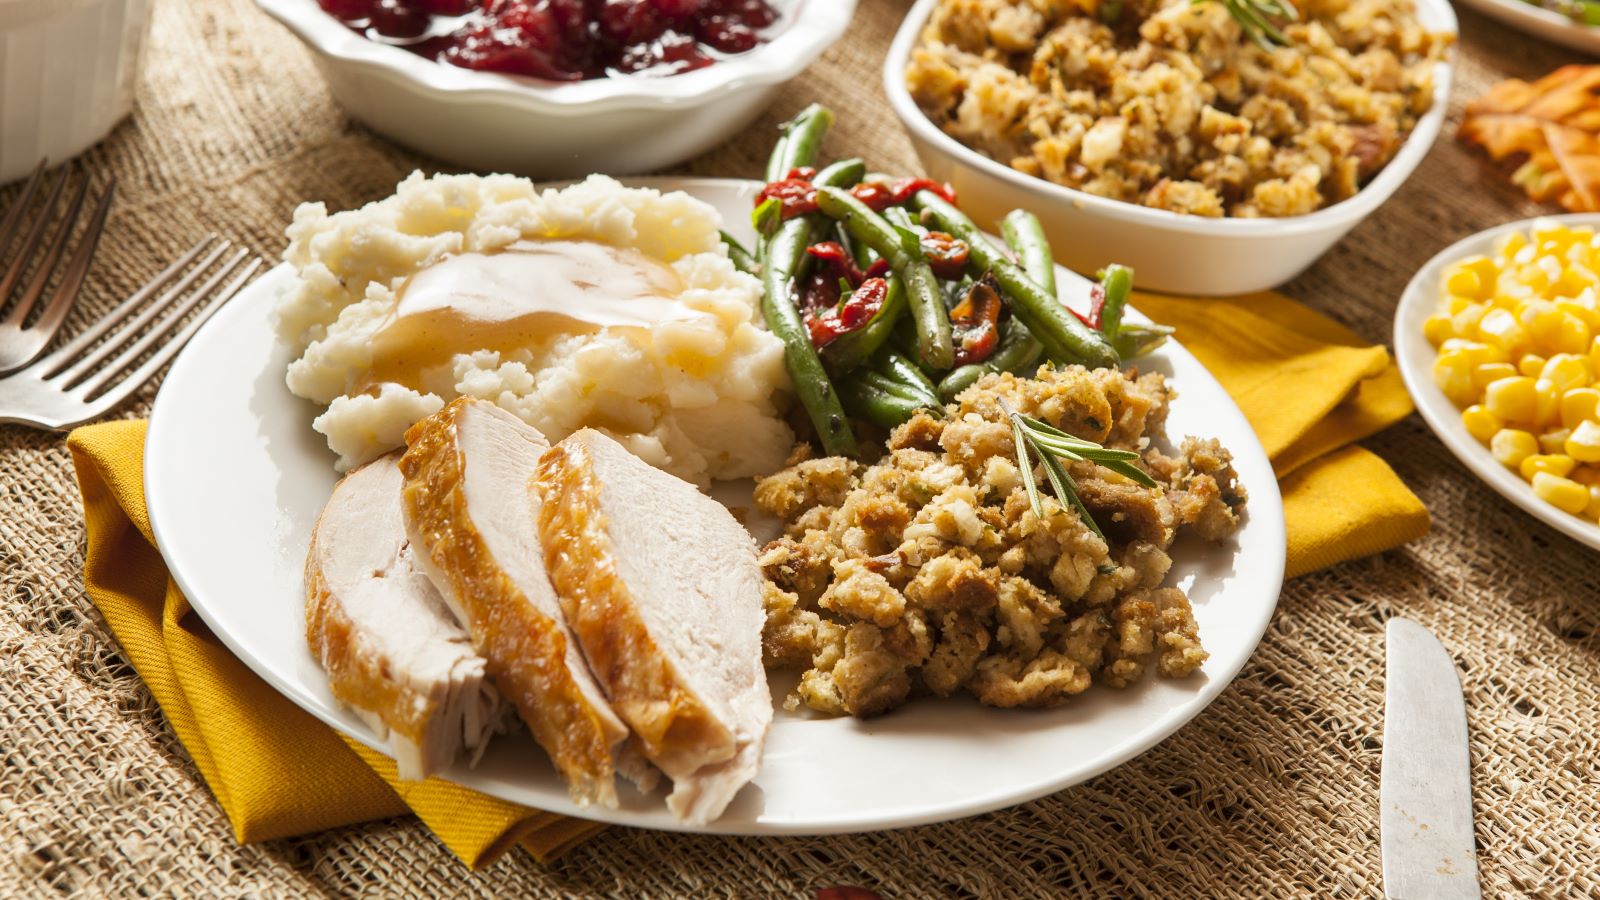 Looking to dodge unhealthy foods this Thanksgiving? An expert shares five items to look out for, and ways to make them more nutritious.